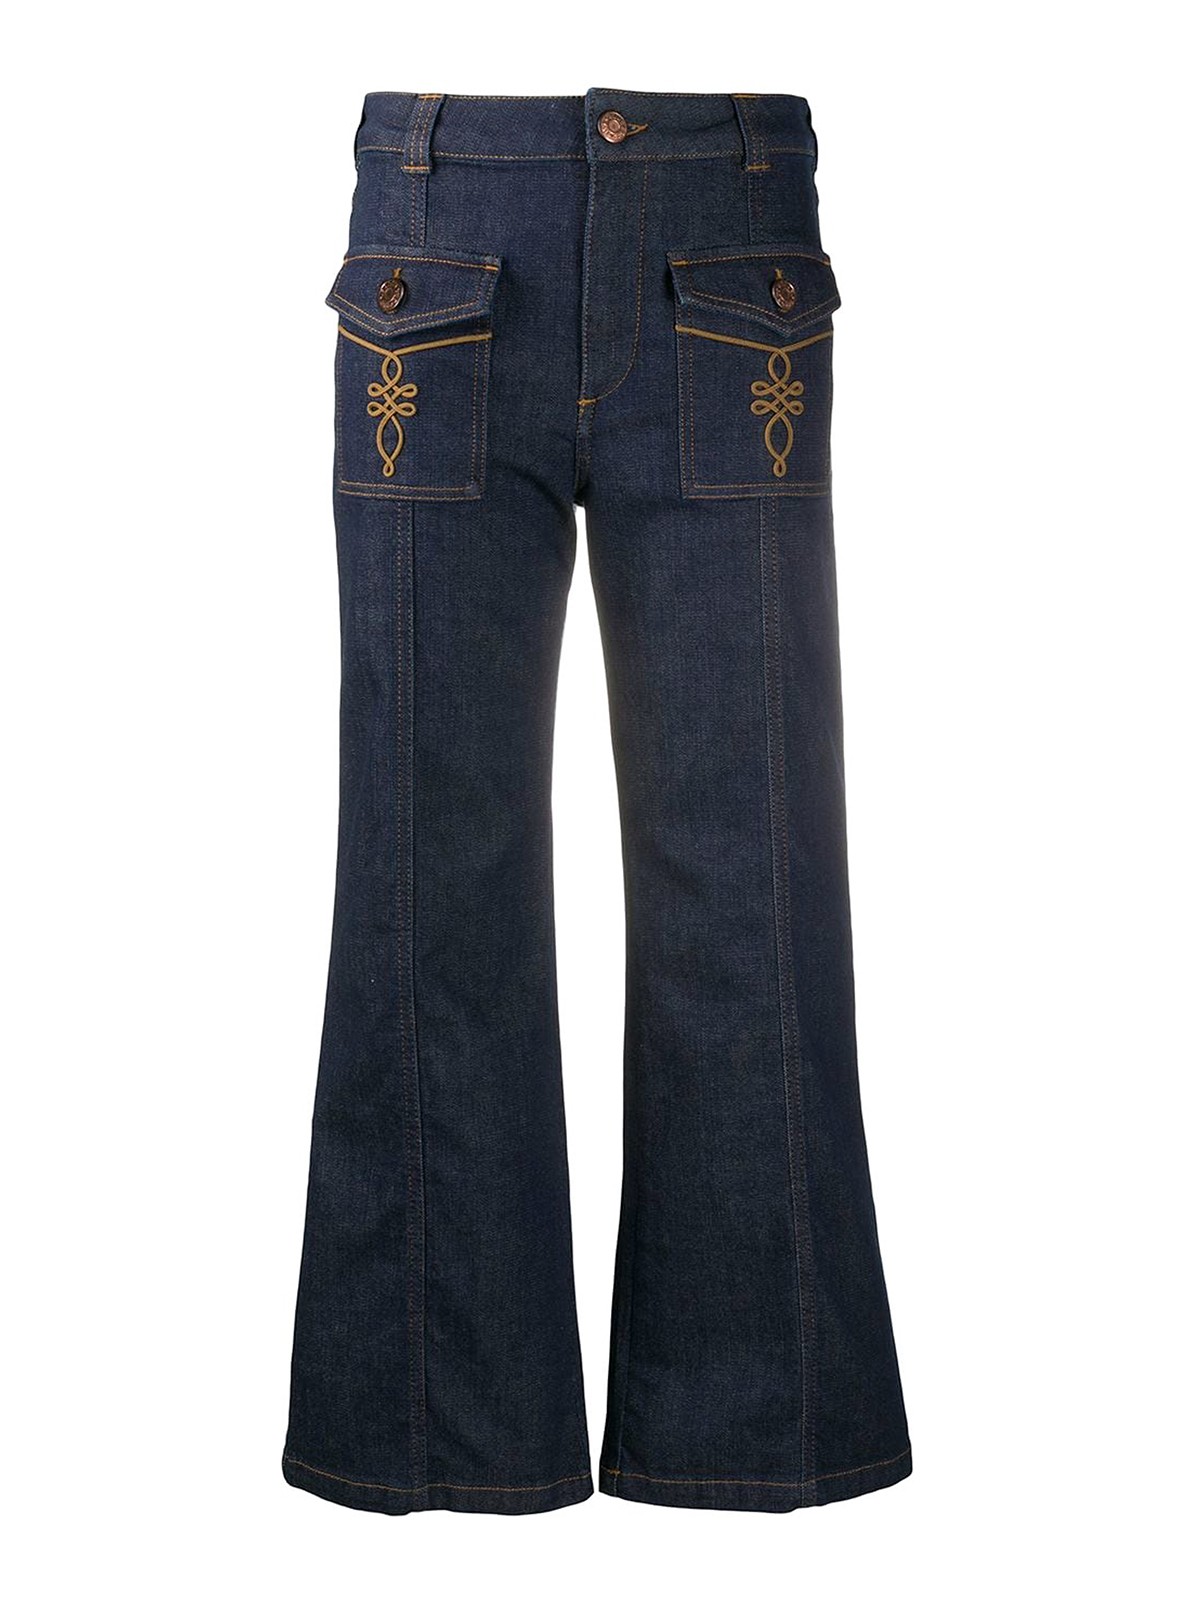 Flared jeans See by Chloé - Denim flared jeans - CHS20ADP0416149Q